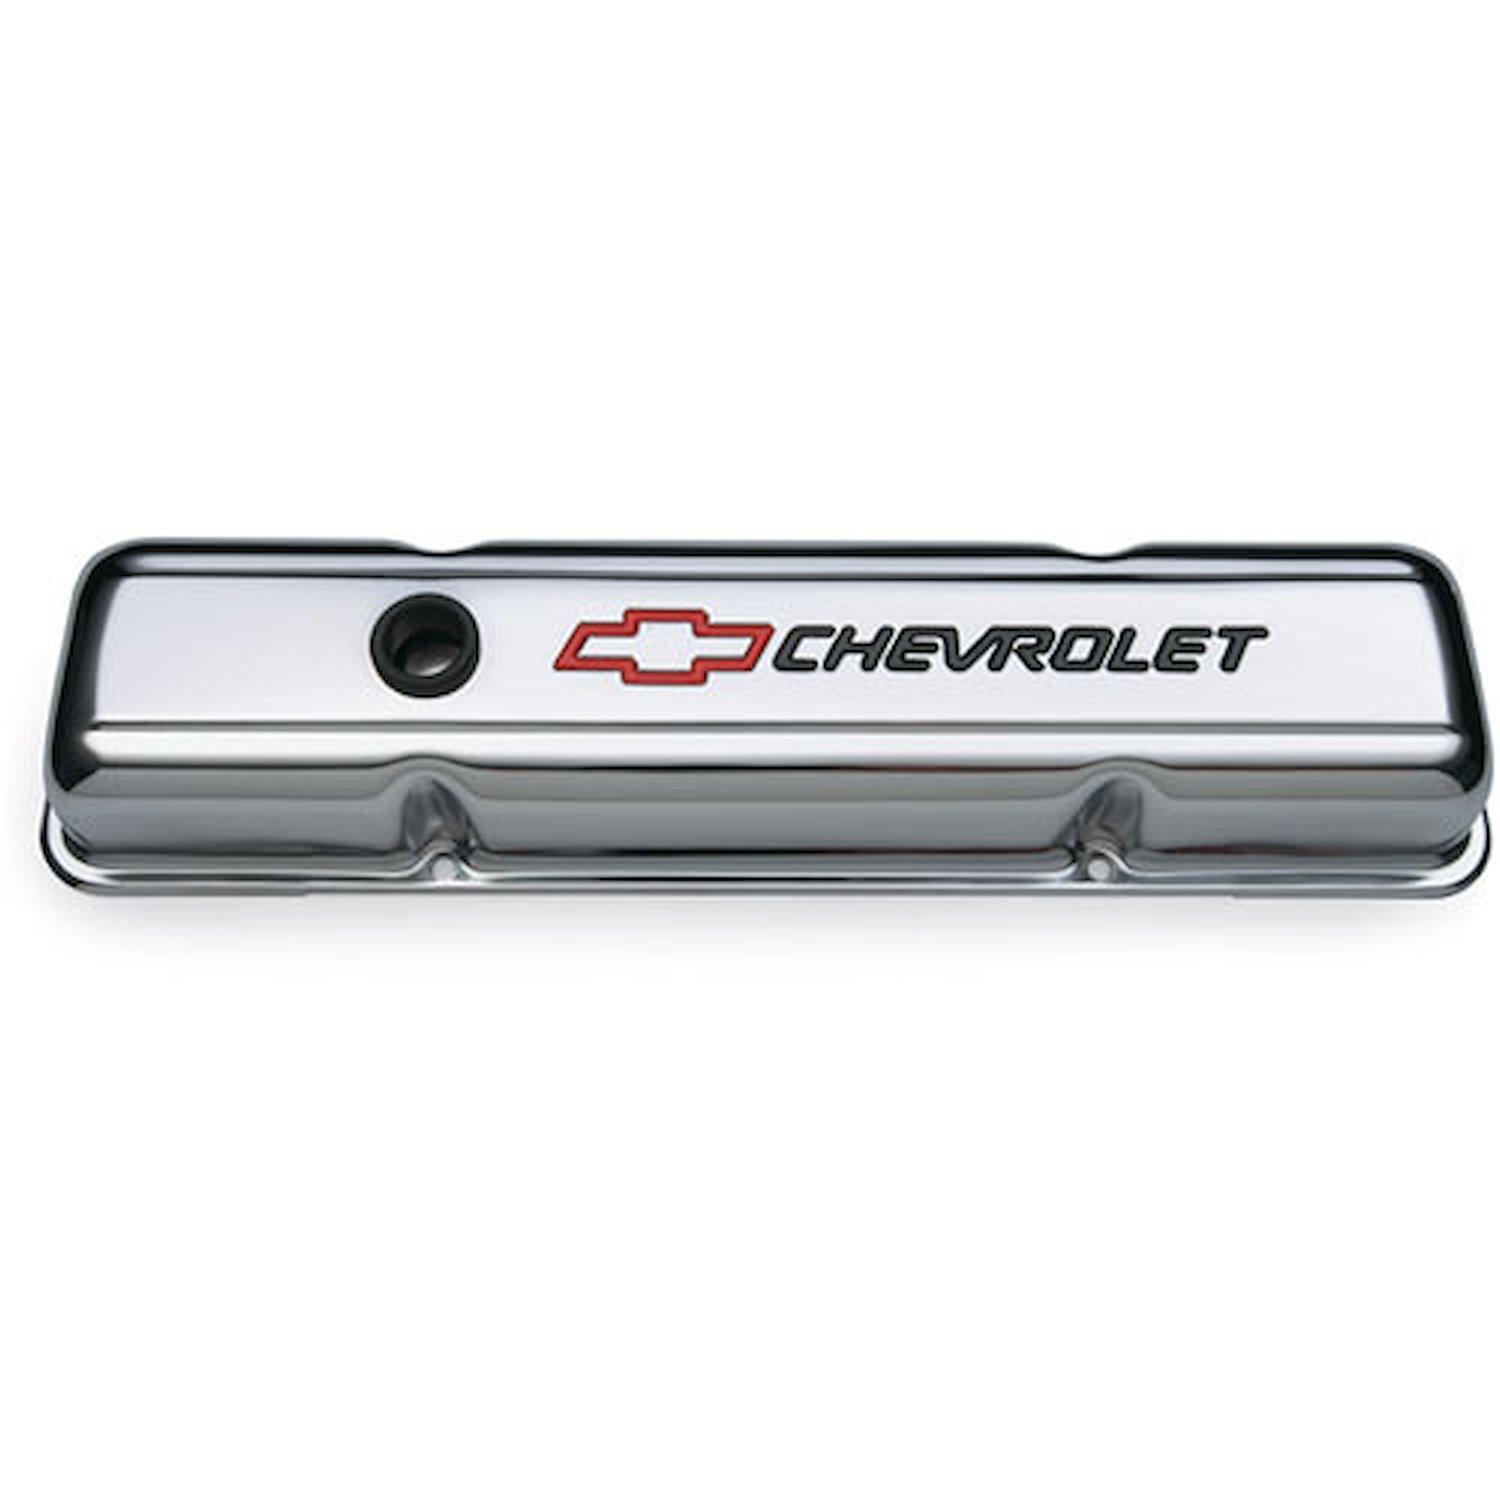 Chrome Short Valve Covers with Red Bowtie & Black Chevrolet Emblem for 1958-1986 Small Block Chevy